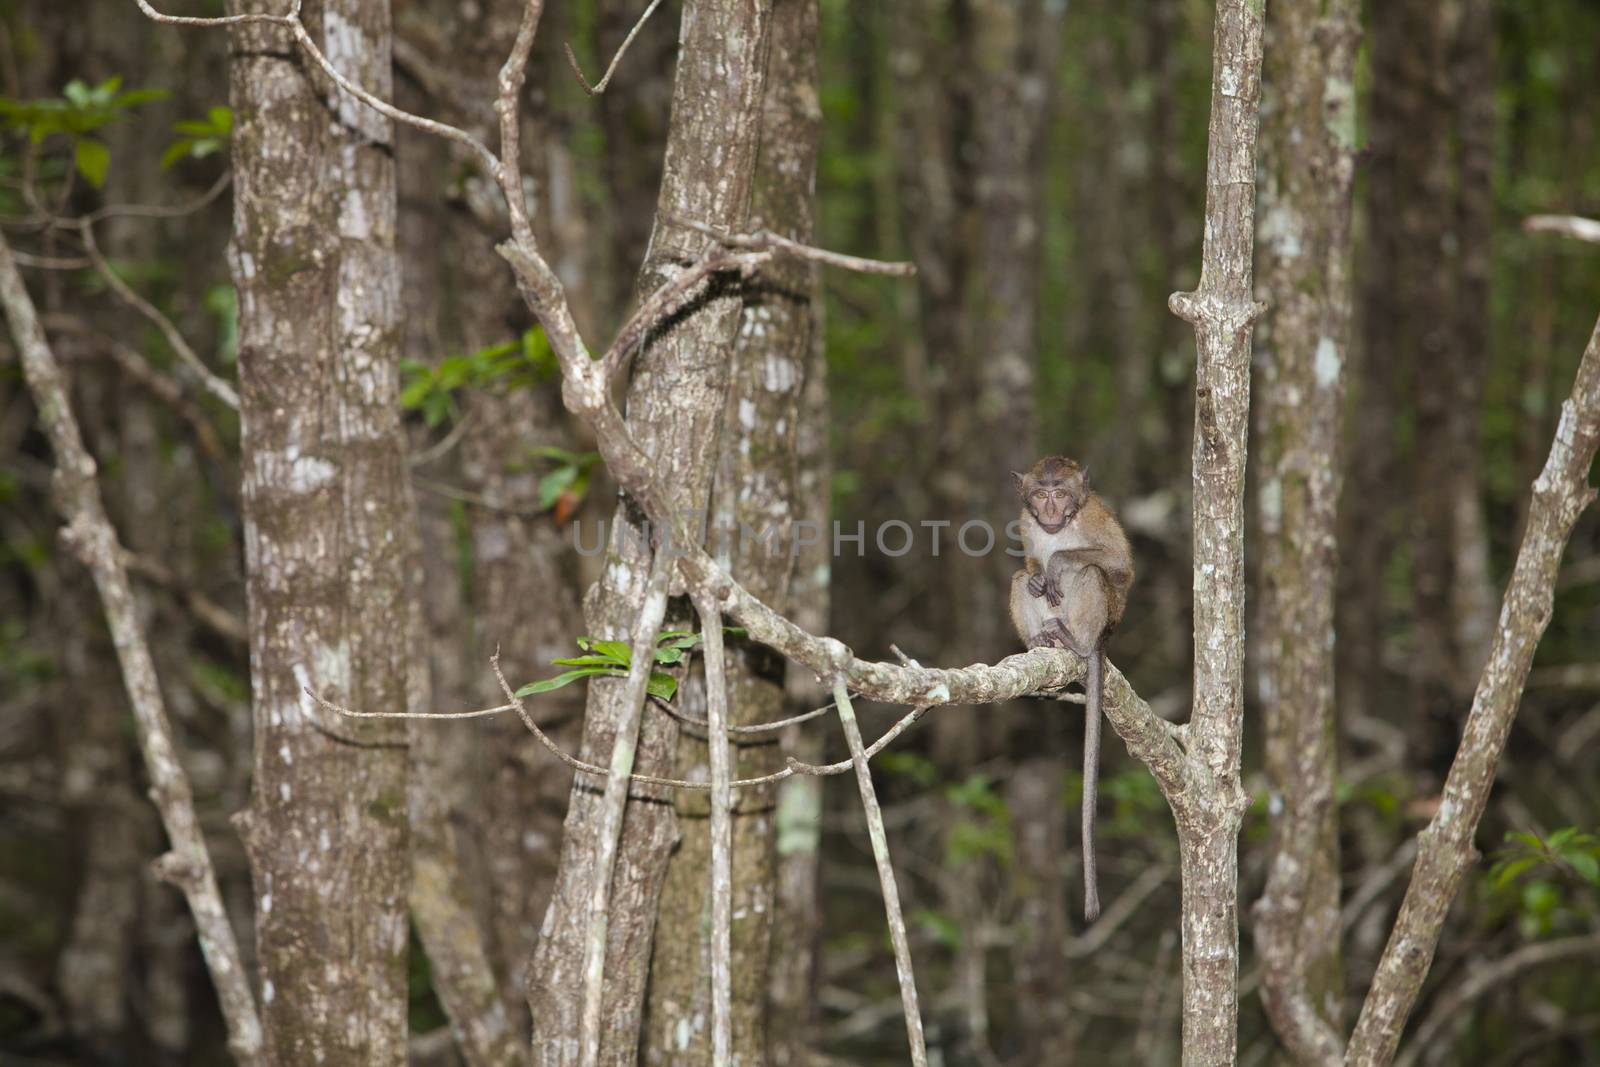 Monkey lives in a natural forest of Thailand